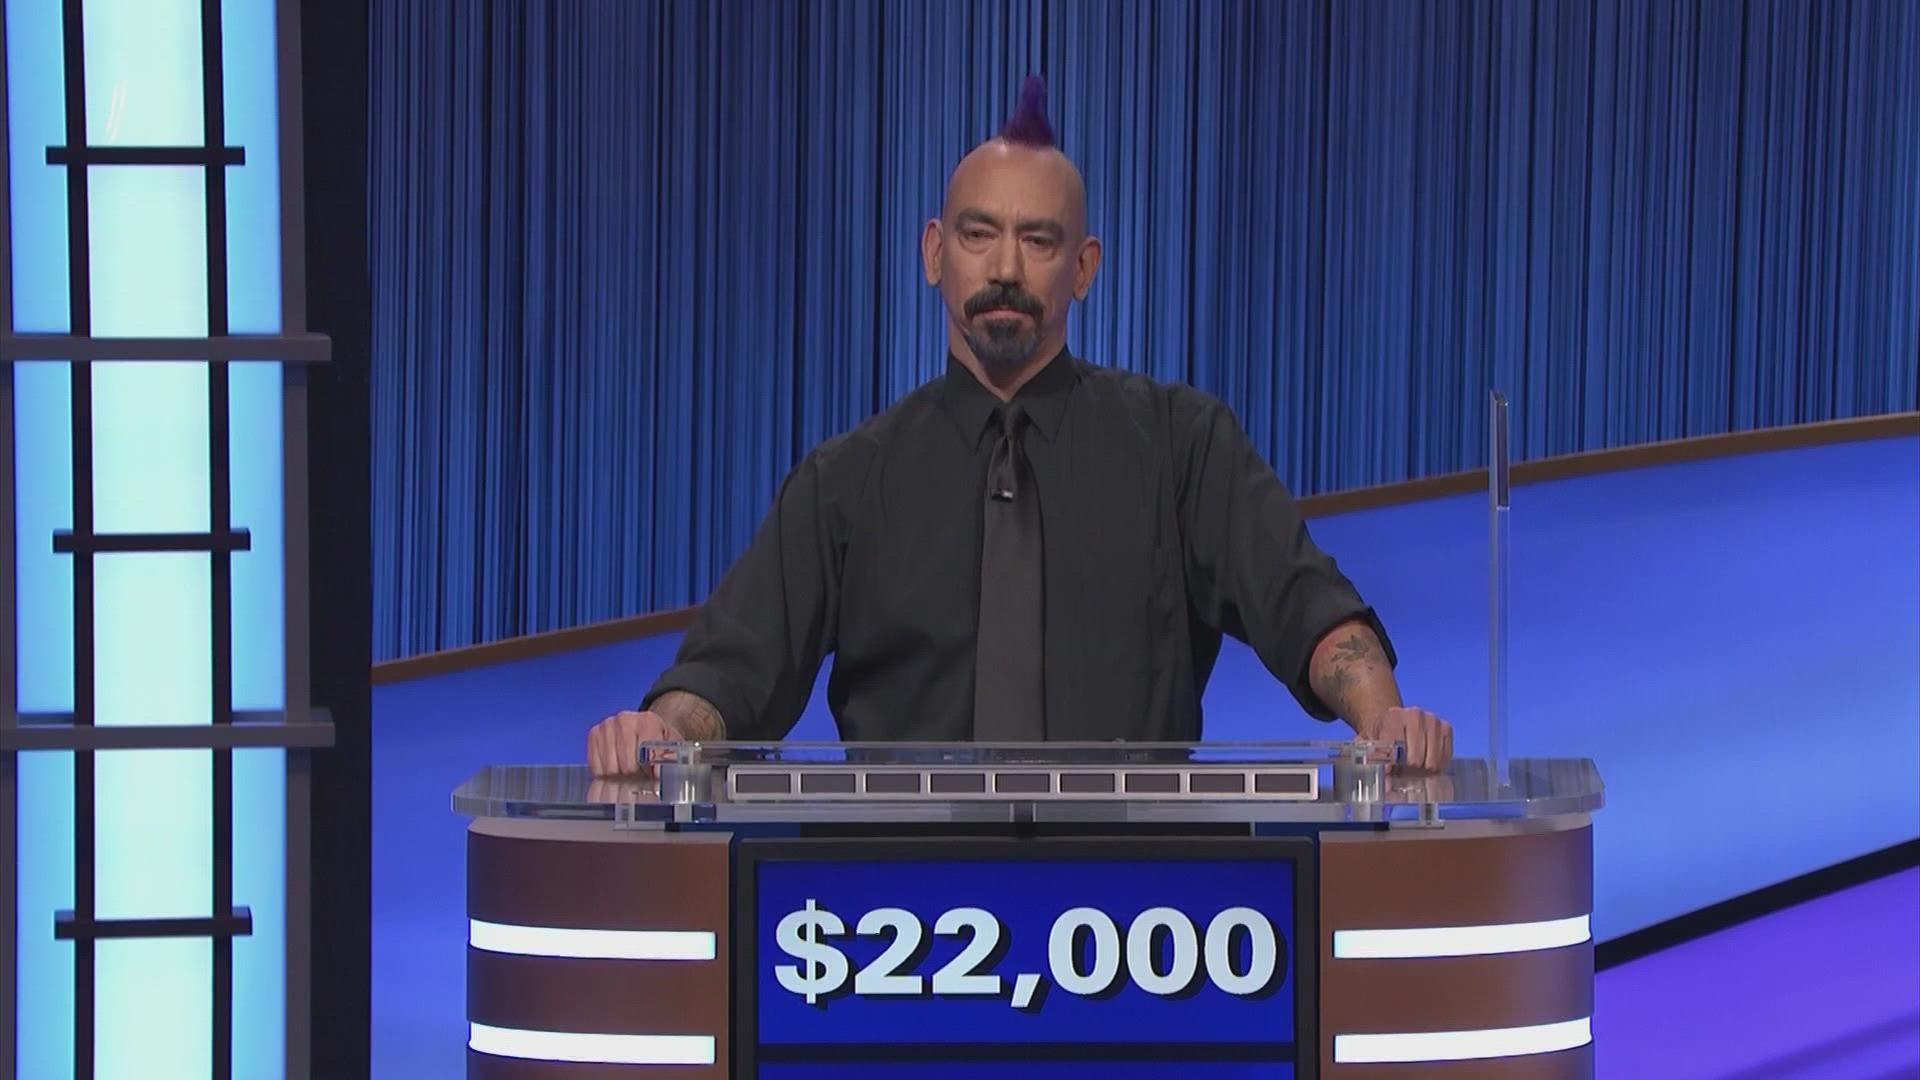 A Columbus native, who is capturing attention for his cool demeanor and haircut, is beginning to make serious money on "Jeopardy!"